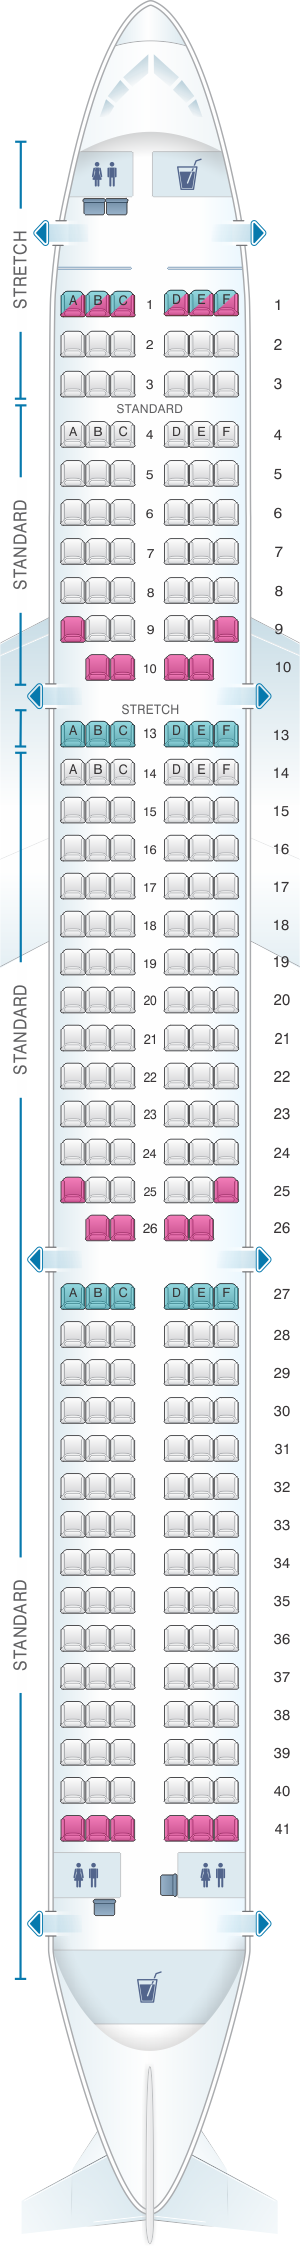 frontier airlines seat assignment